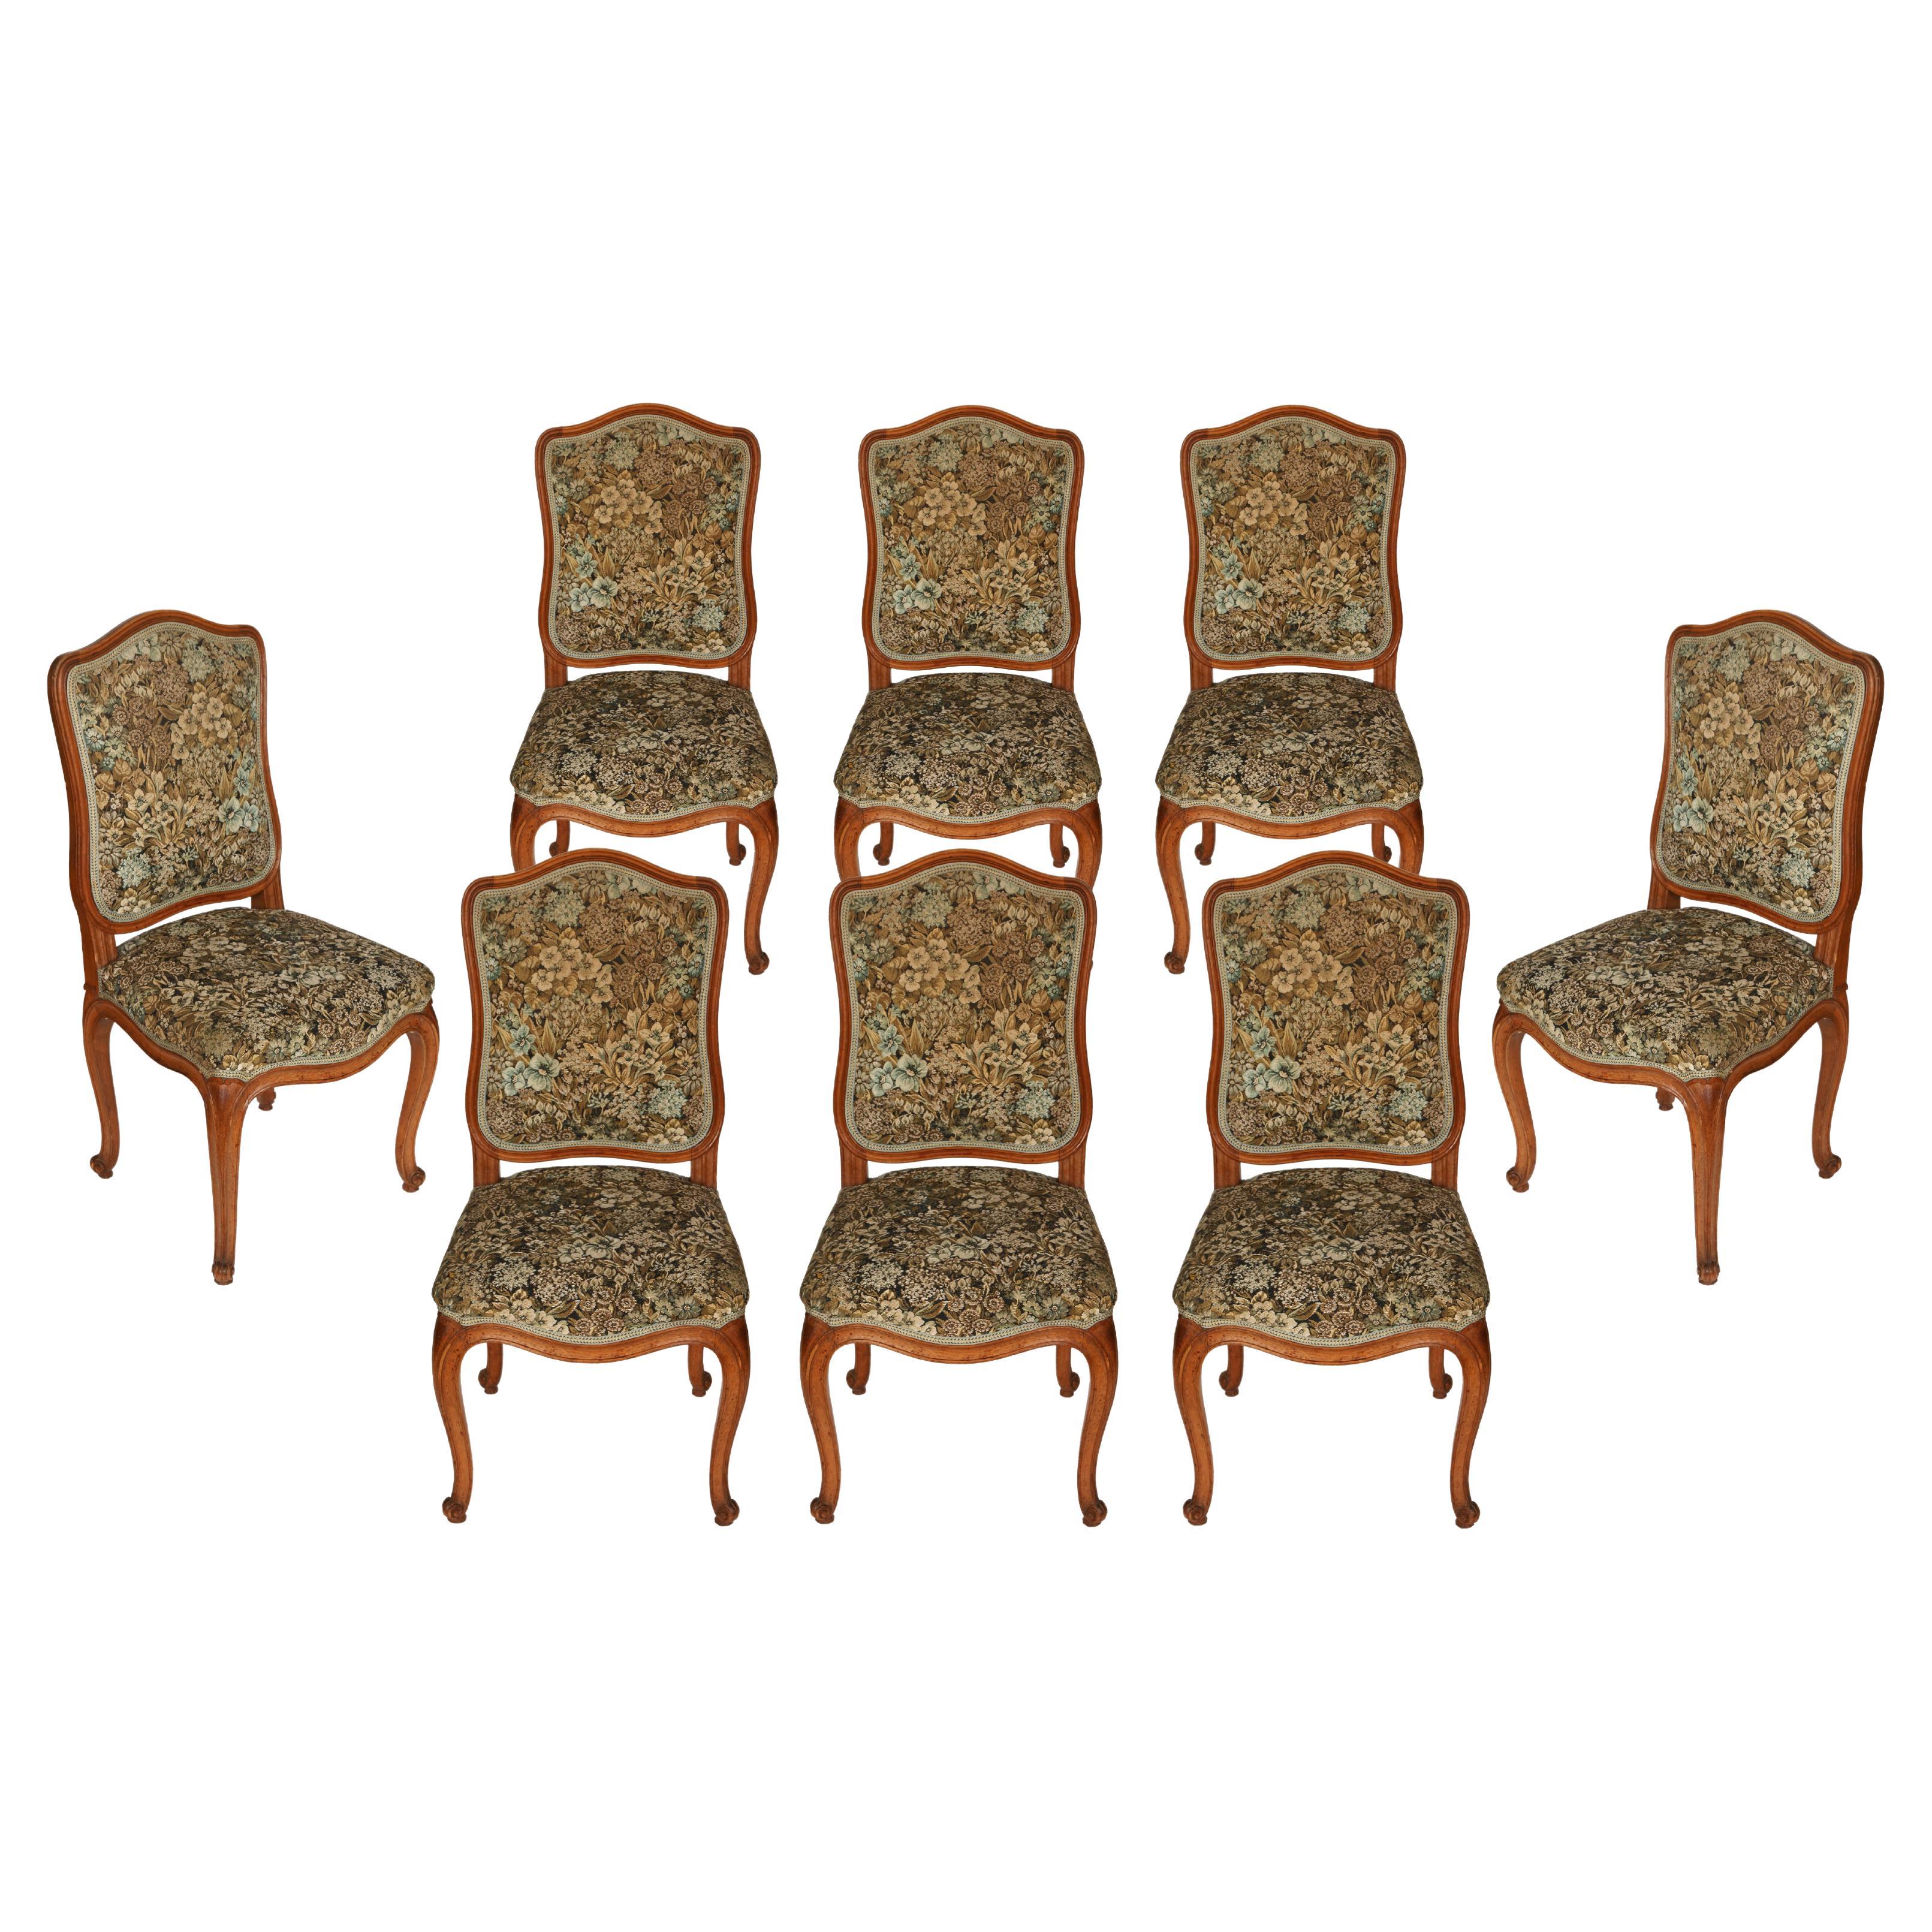 Set of Eight French Upholstered Dining Chairs with Cabriole Leg